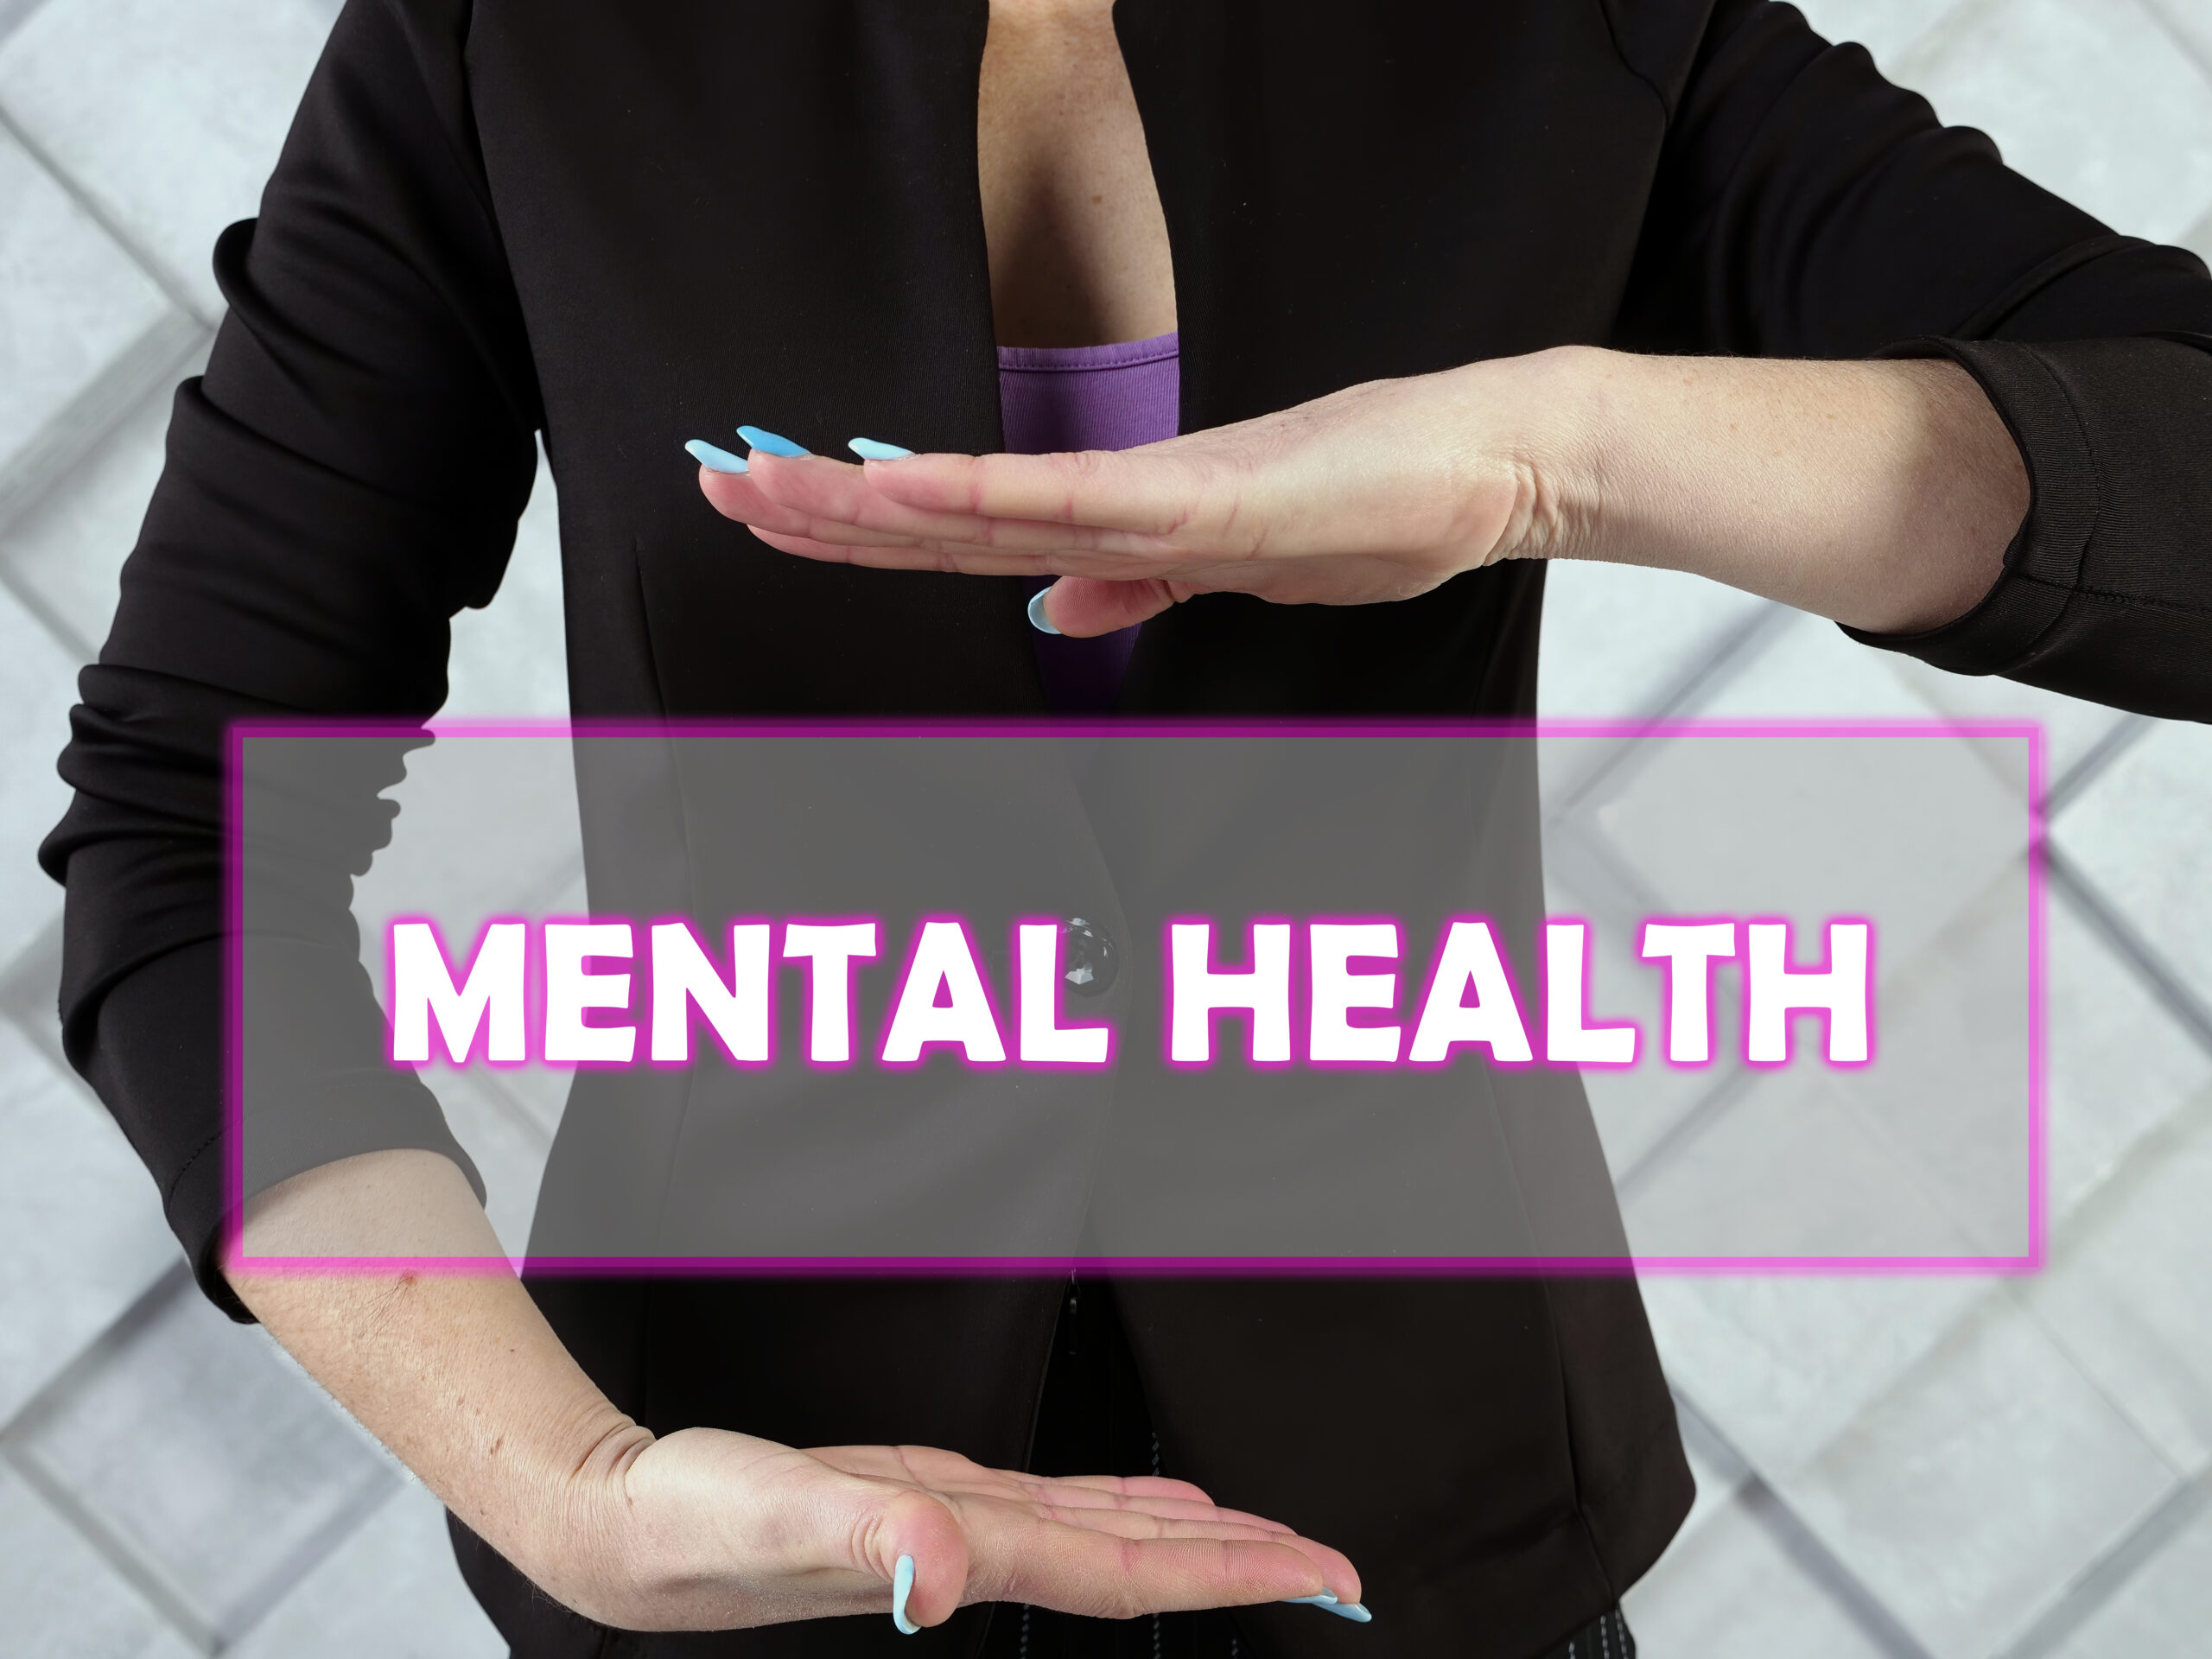 Mental Health and Well-Being Act